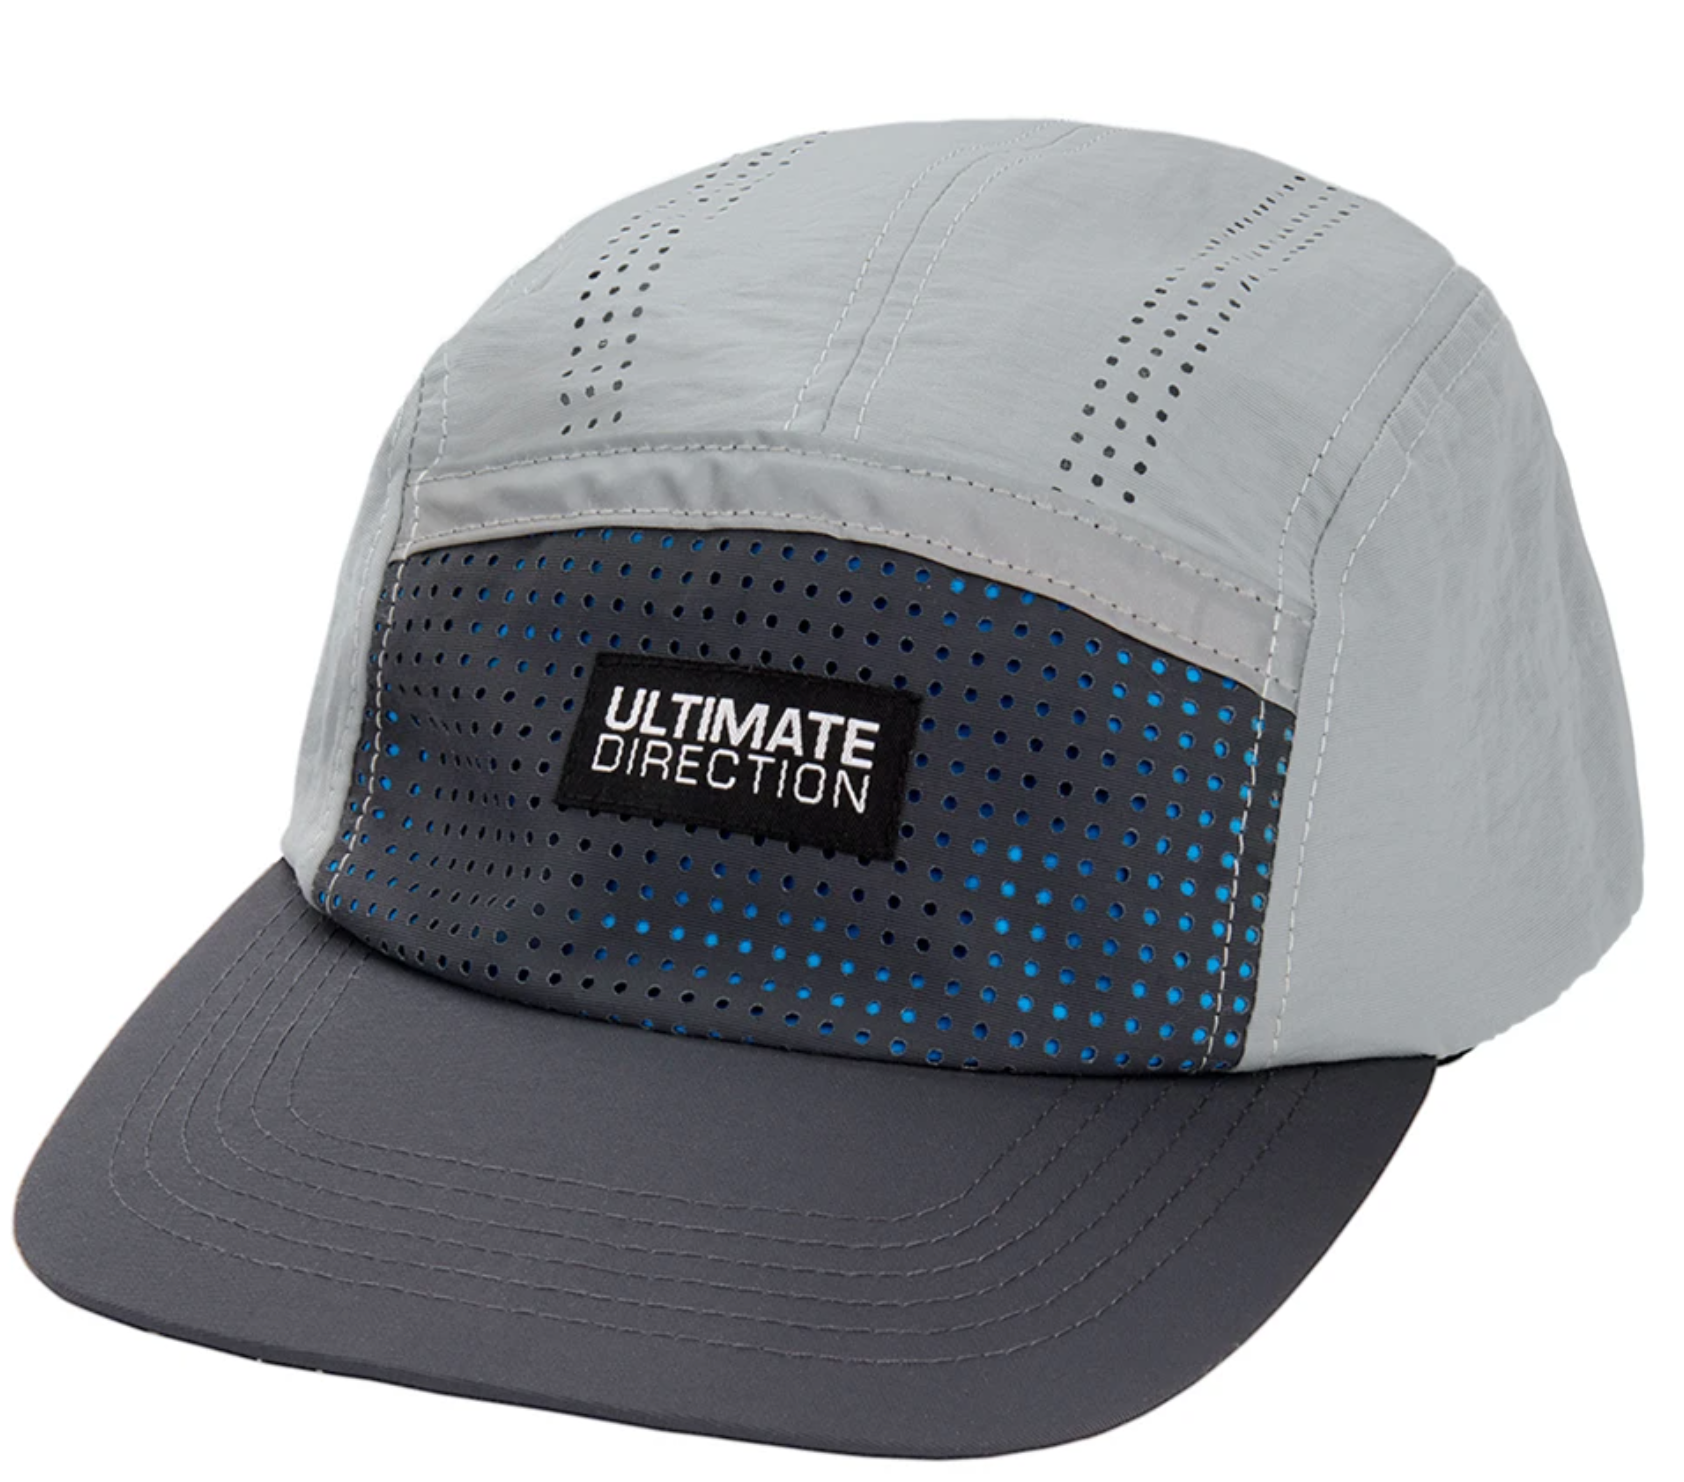 Ultimate Direction 'The Classic' Cap